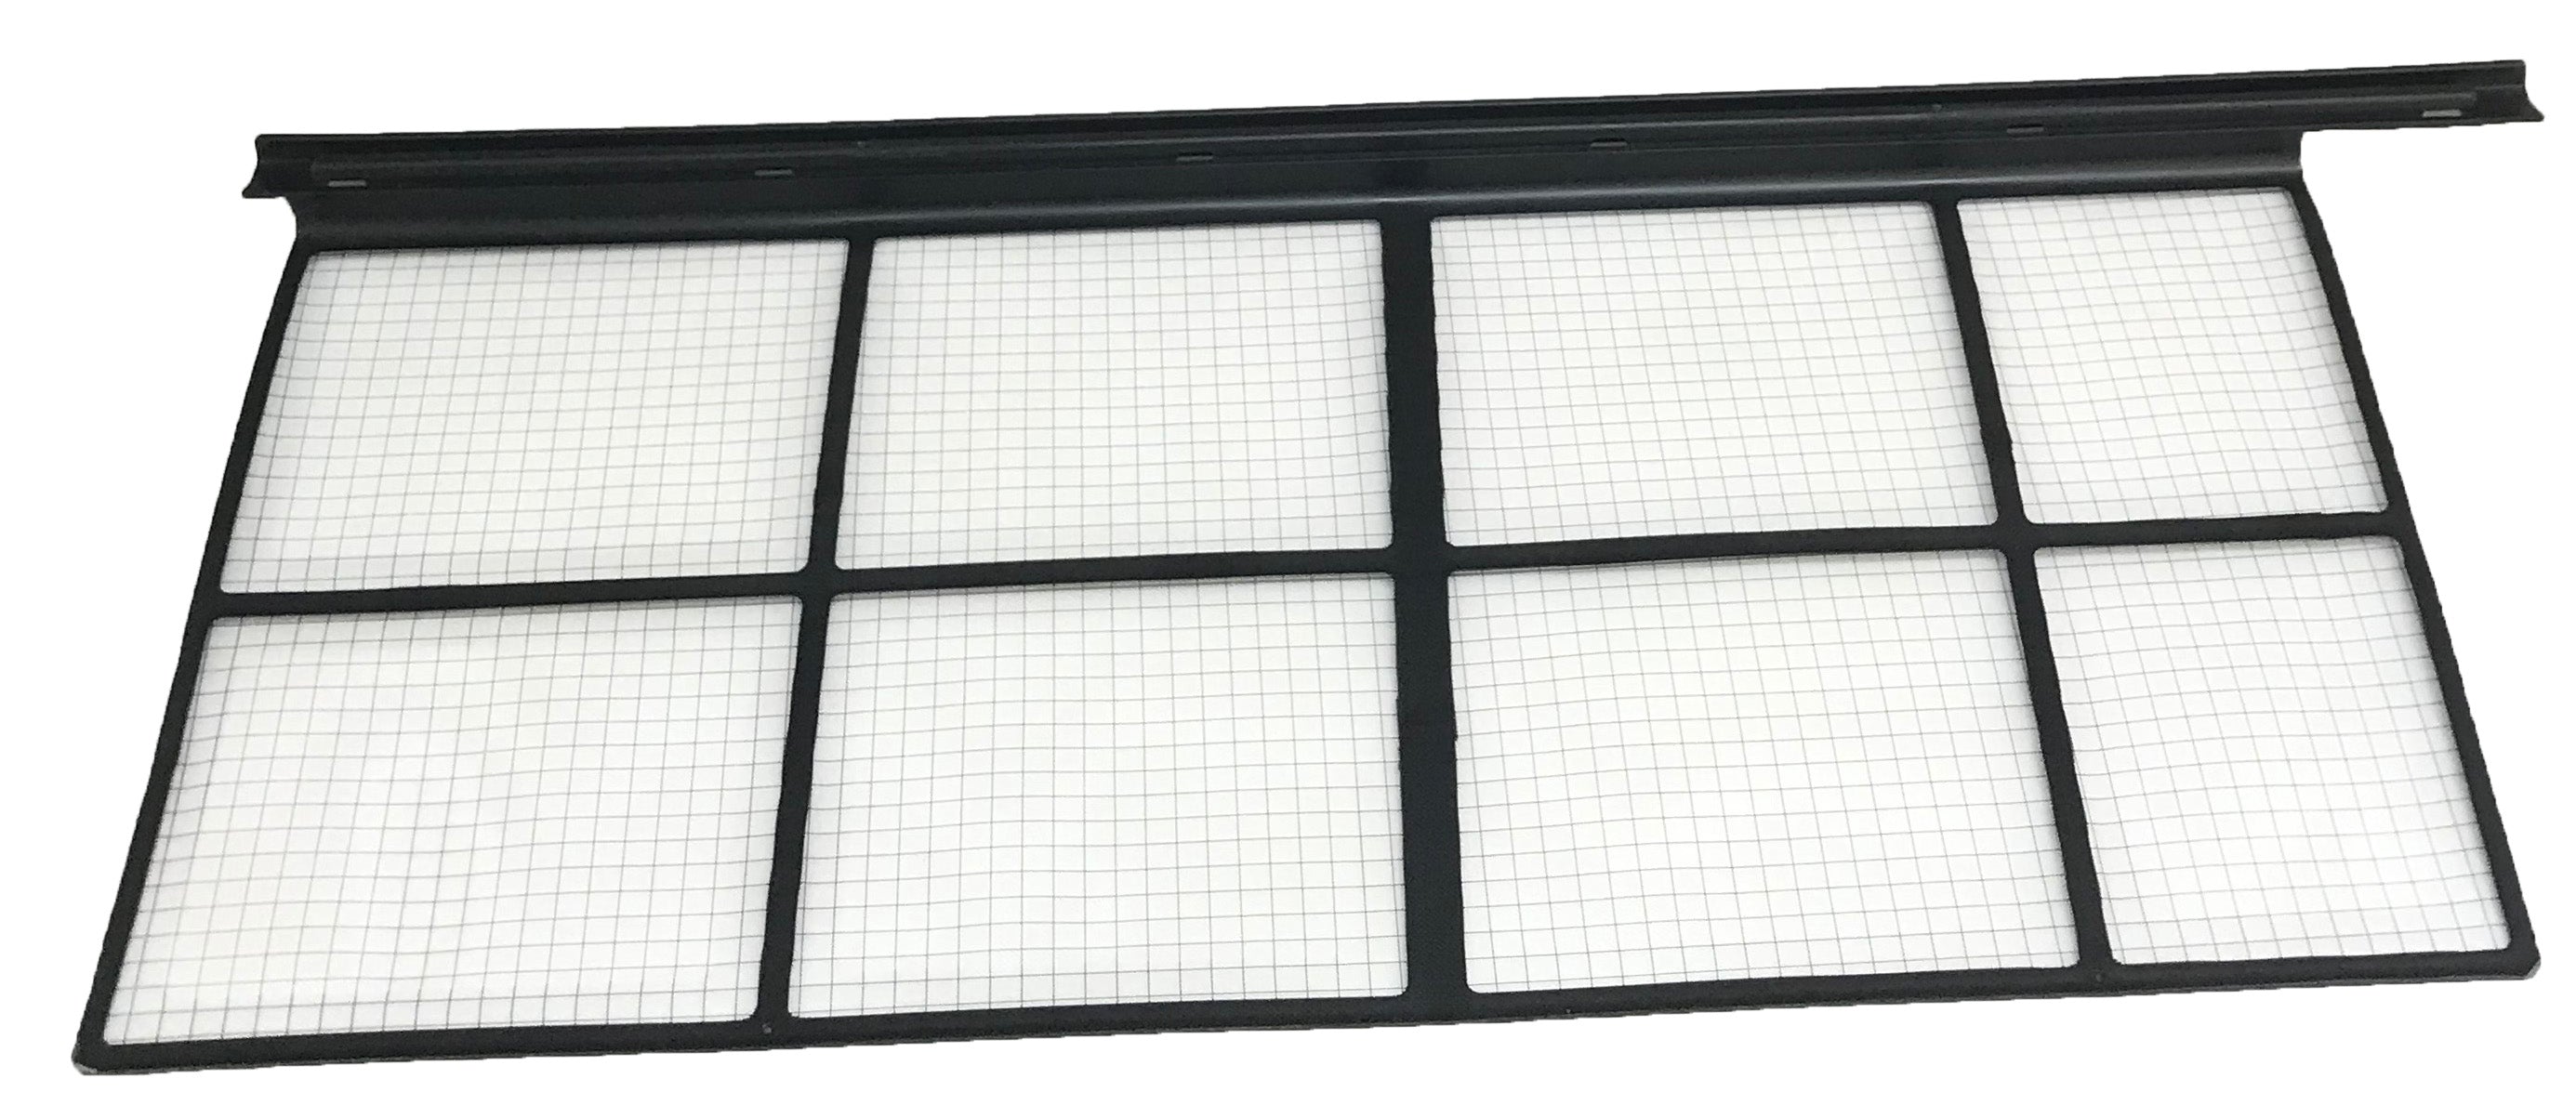 NEW OEM LG Air Conditioner AC Filter Shipped With LW1214ER, LW1215ER